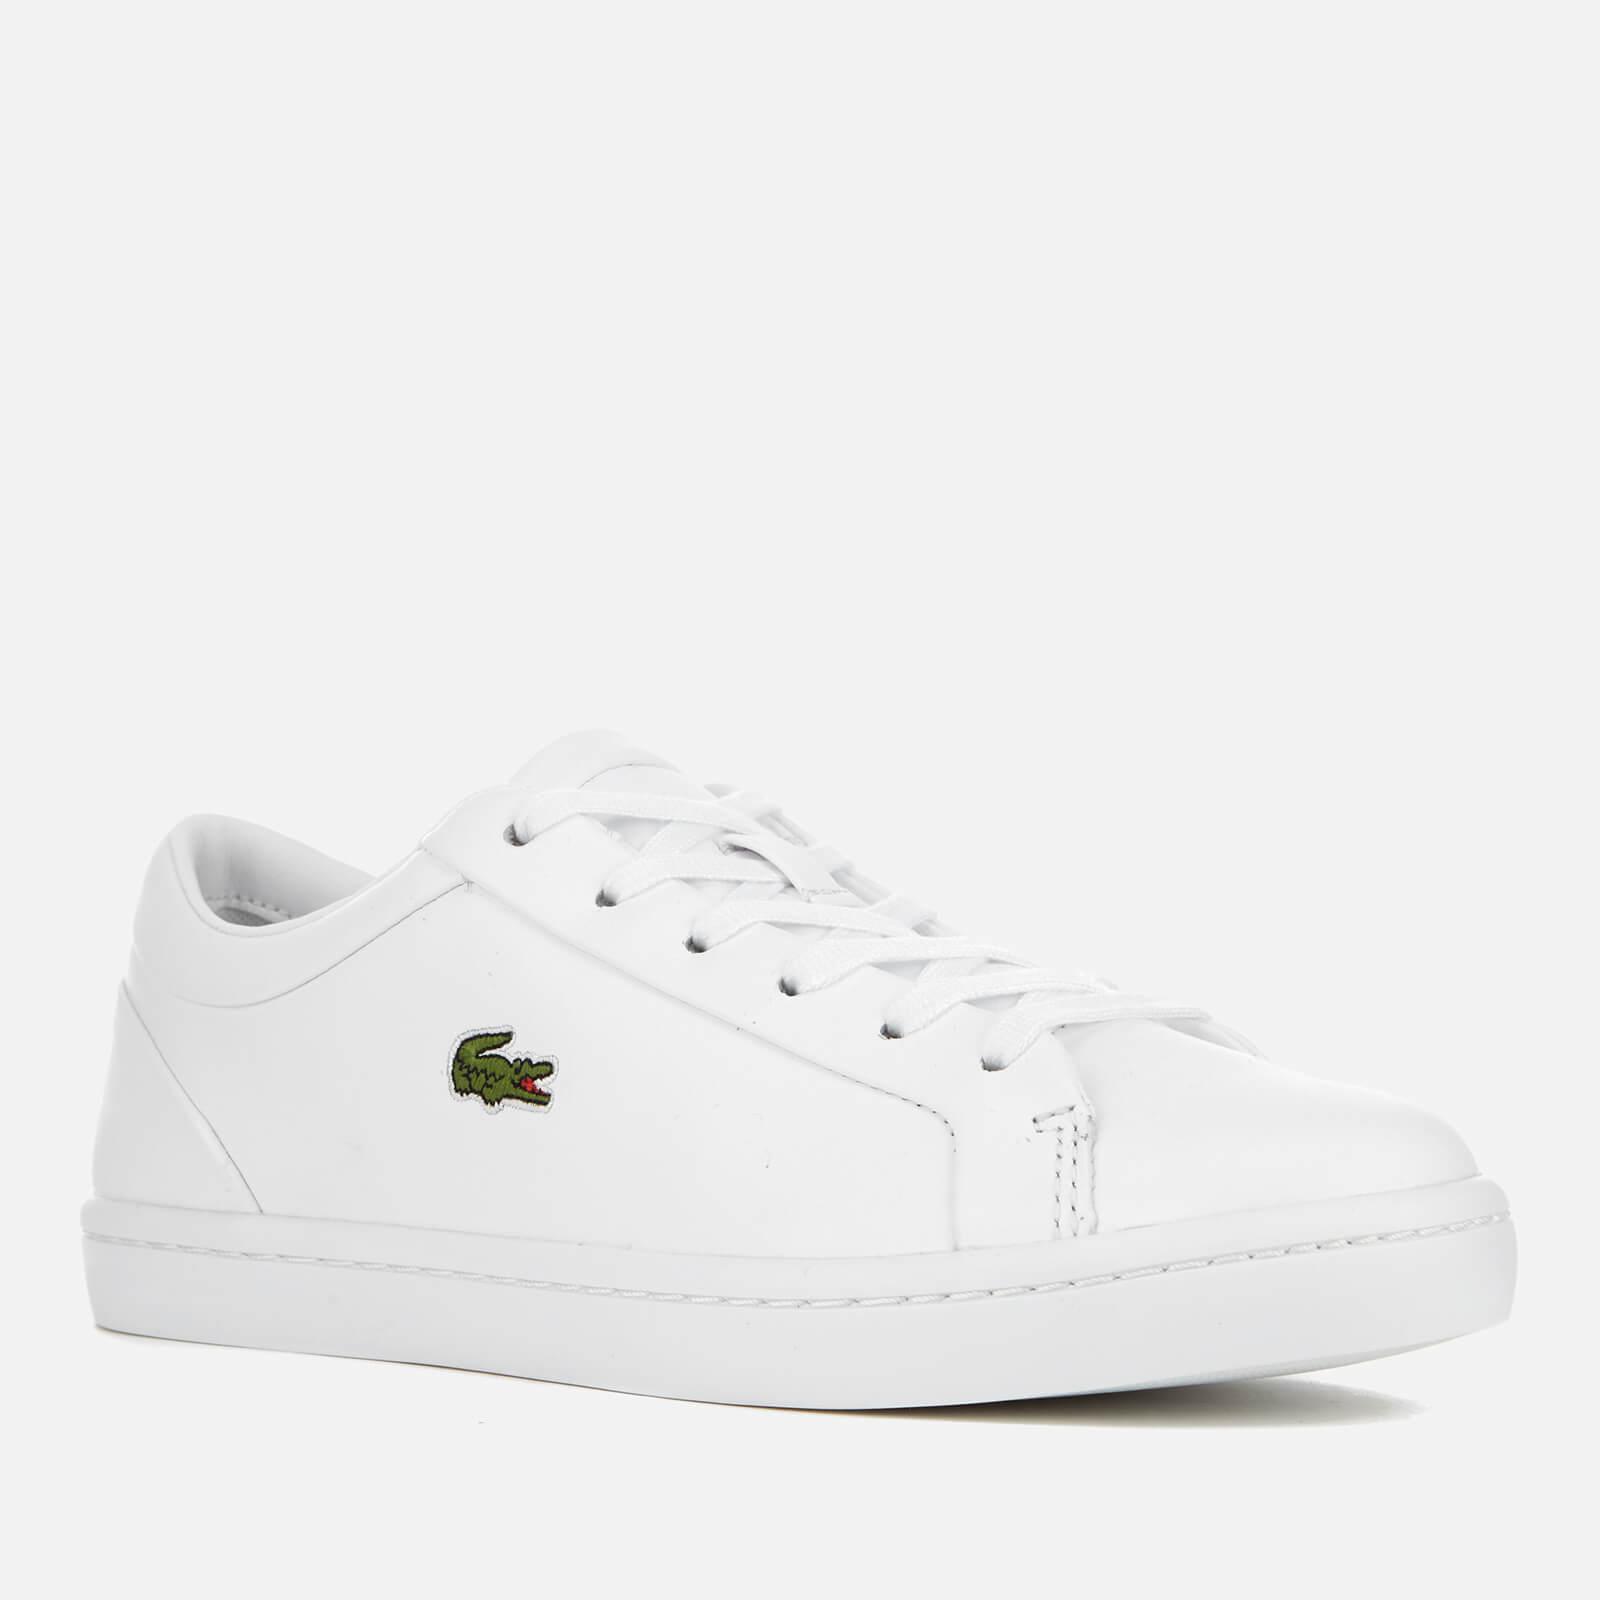 Lacoste Straightset Lace Flash Sales, SAVE 56%.